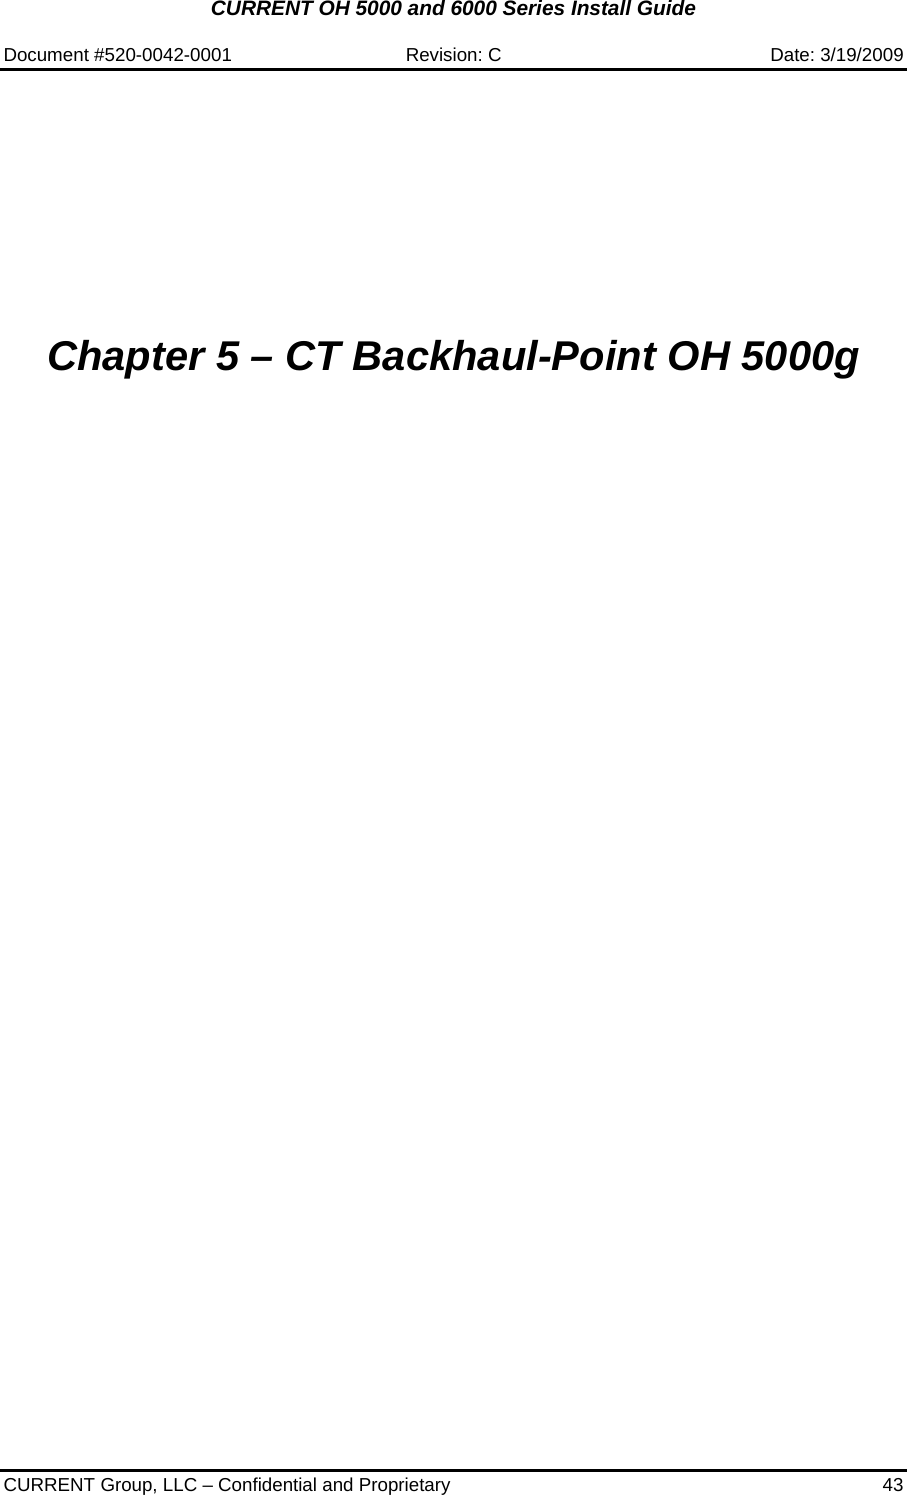 CURRENT OH 5000 and 6000 Series Install Guide  Document #520-0042-0001  Revision: C  Date: 3/19/2009  CURRENT Group, LLC – Confidential and Proprietary  43          Chapter 5 – CT Backhaul-Point OH 5000g                            